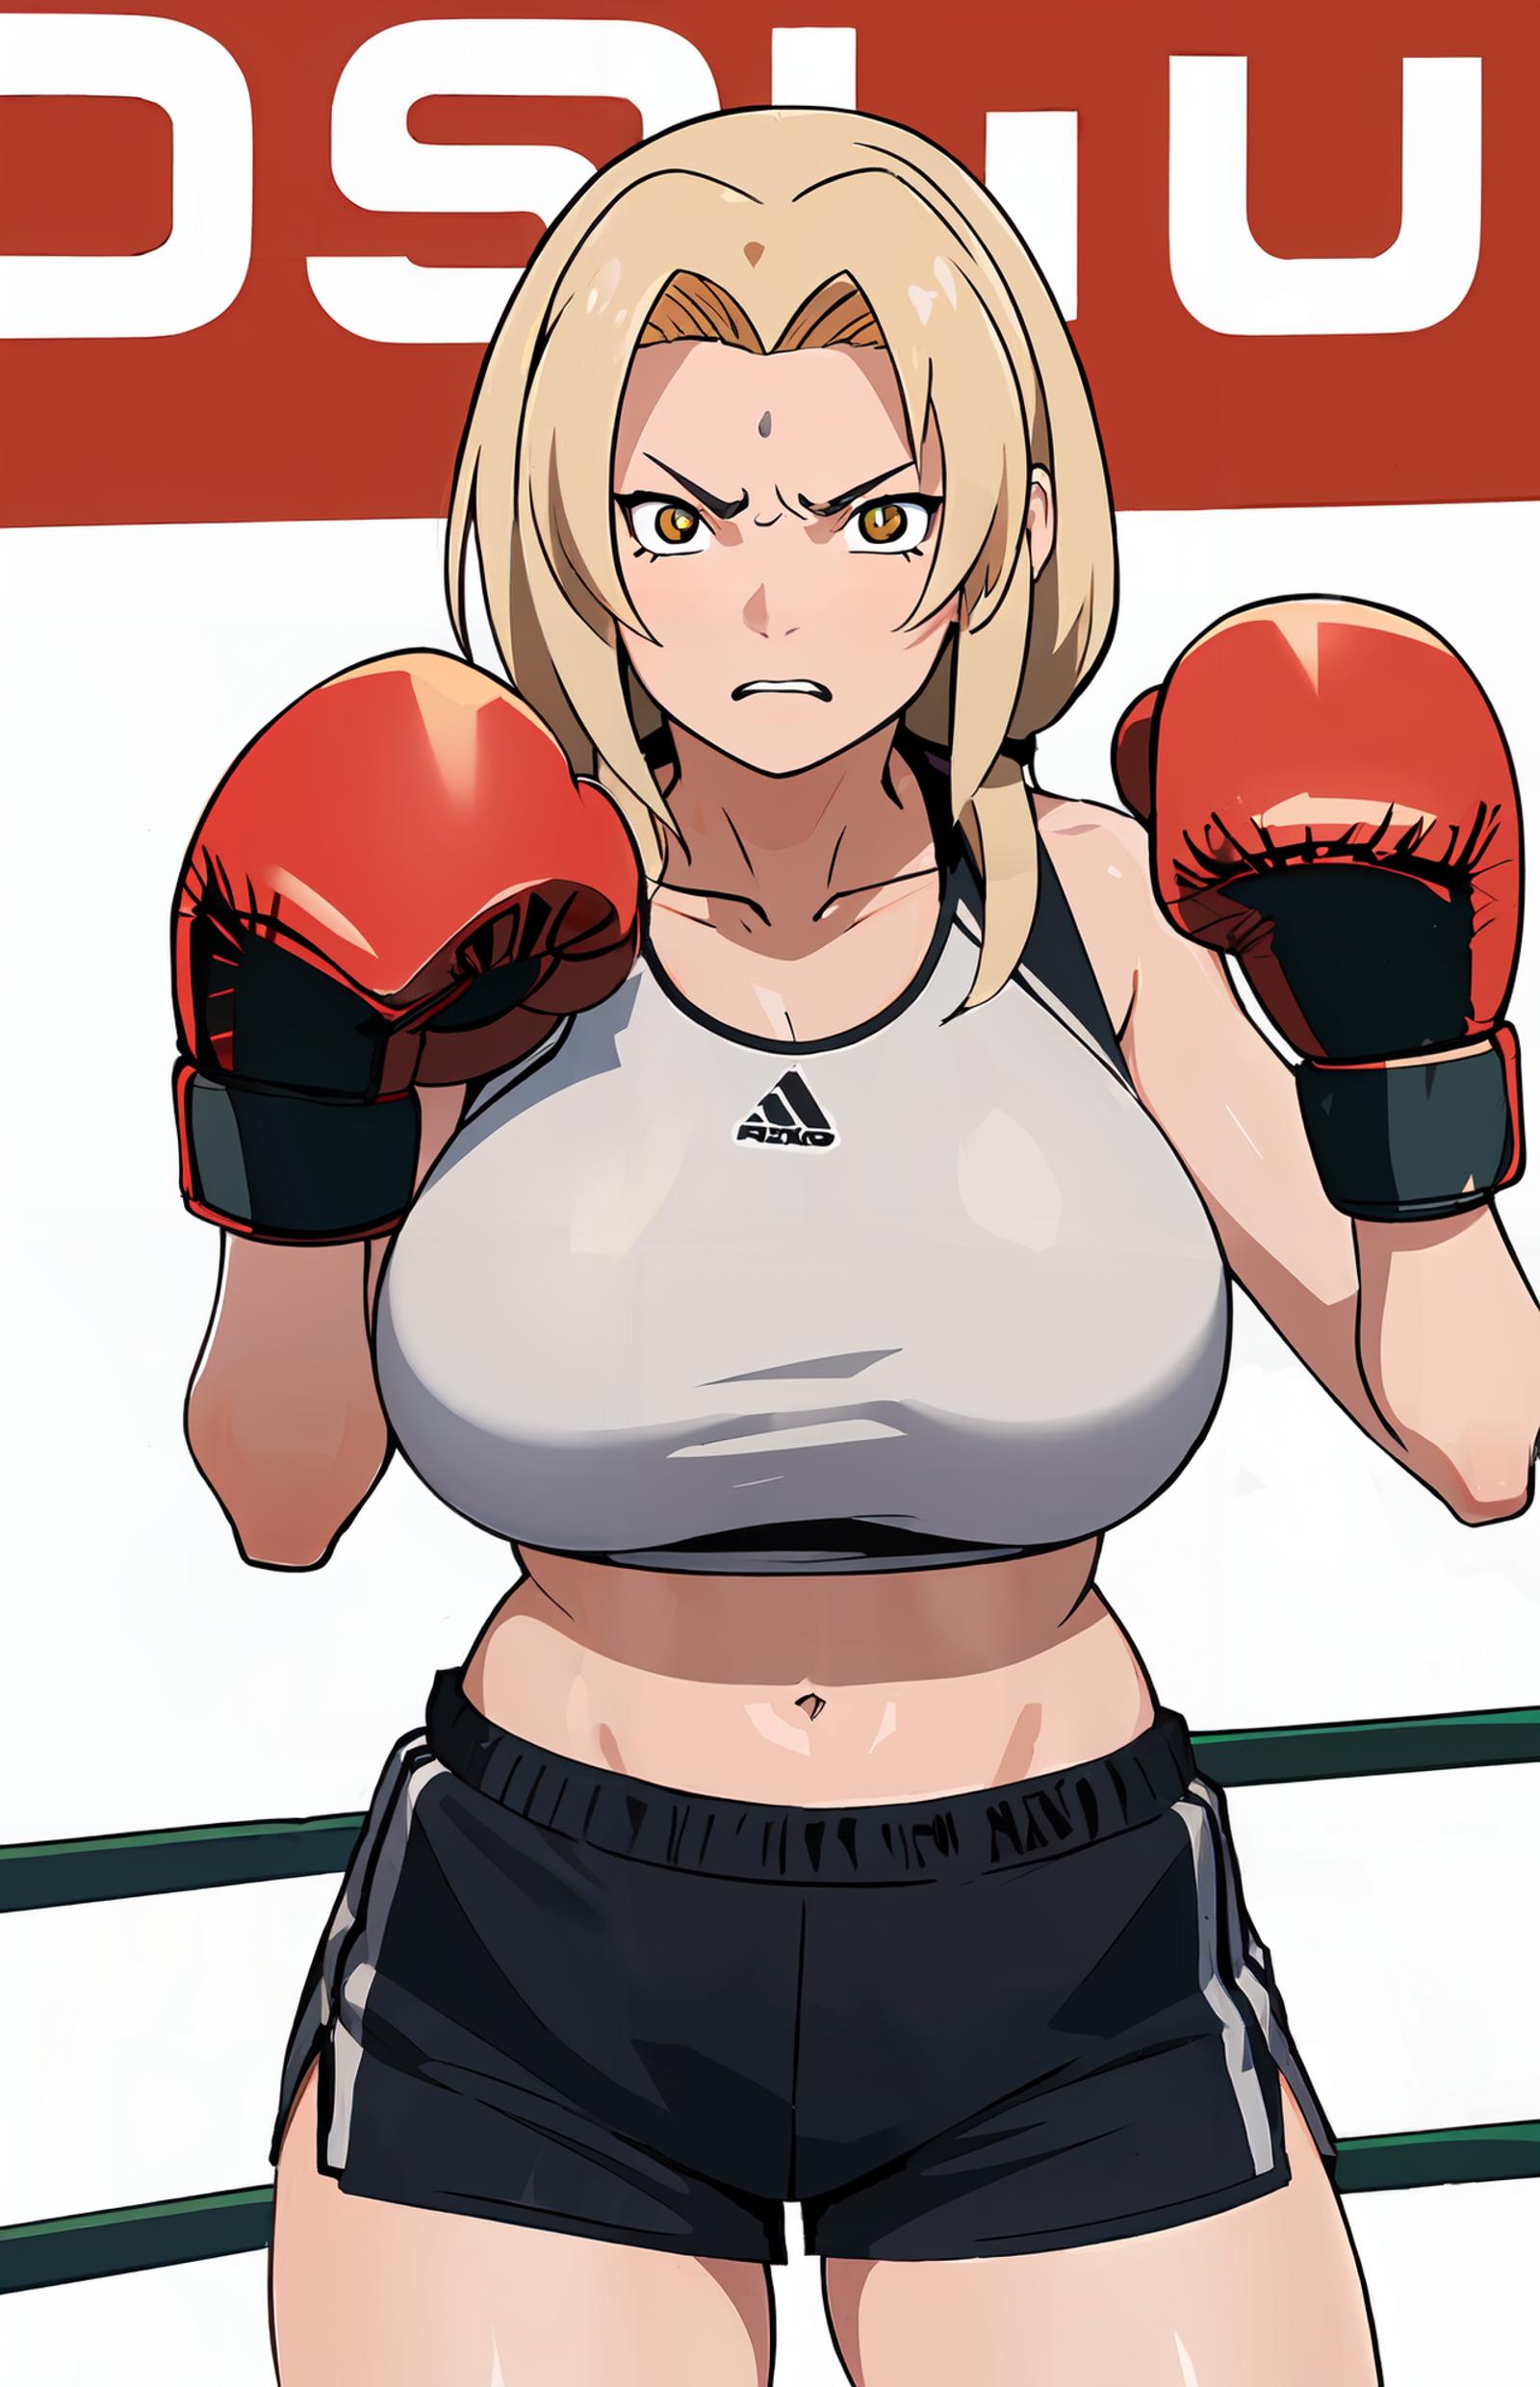 Boxing Girl image by n3gative